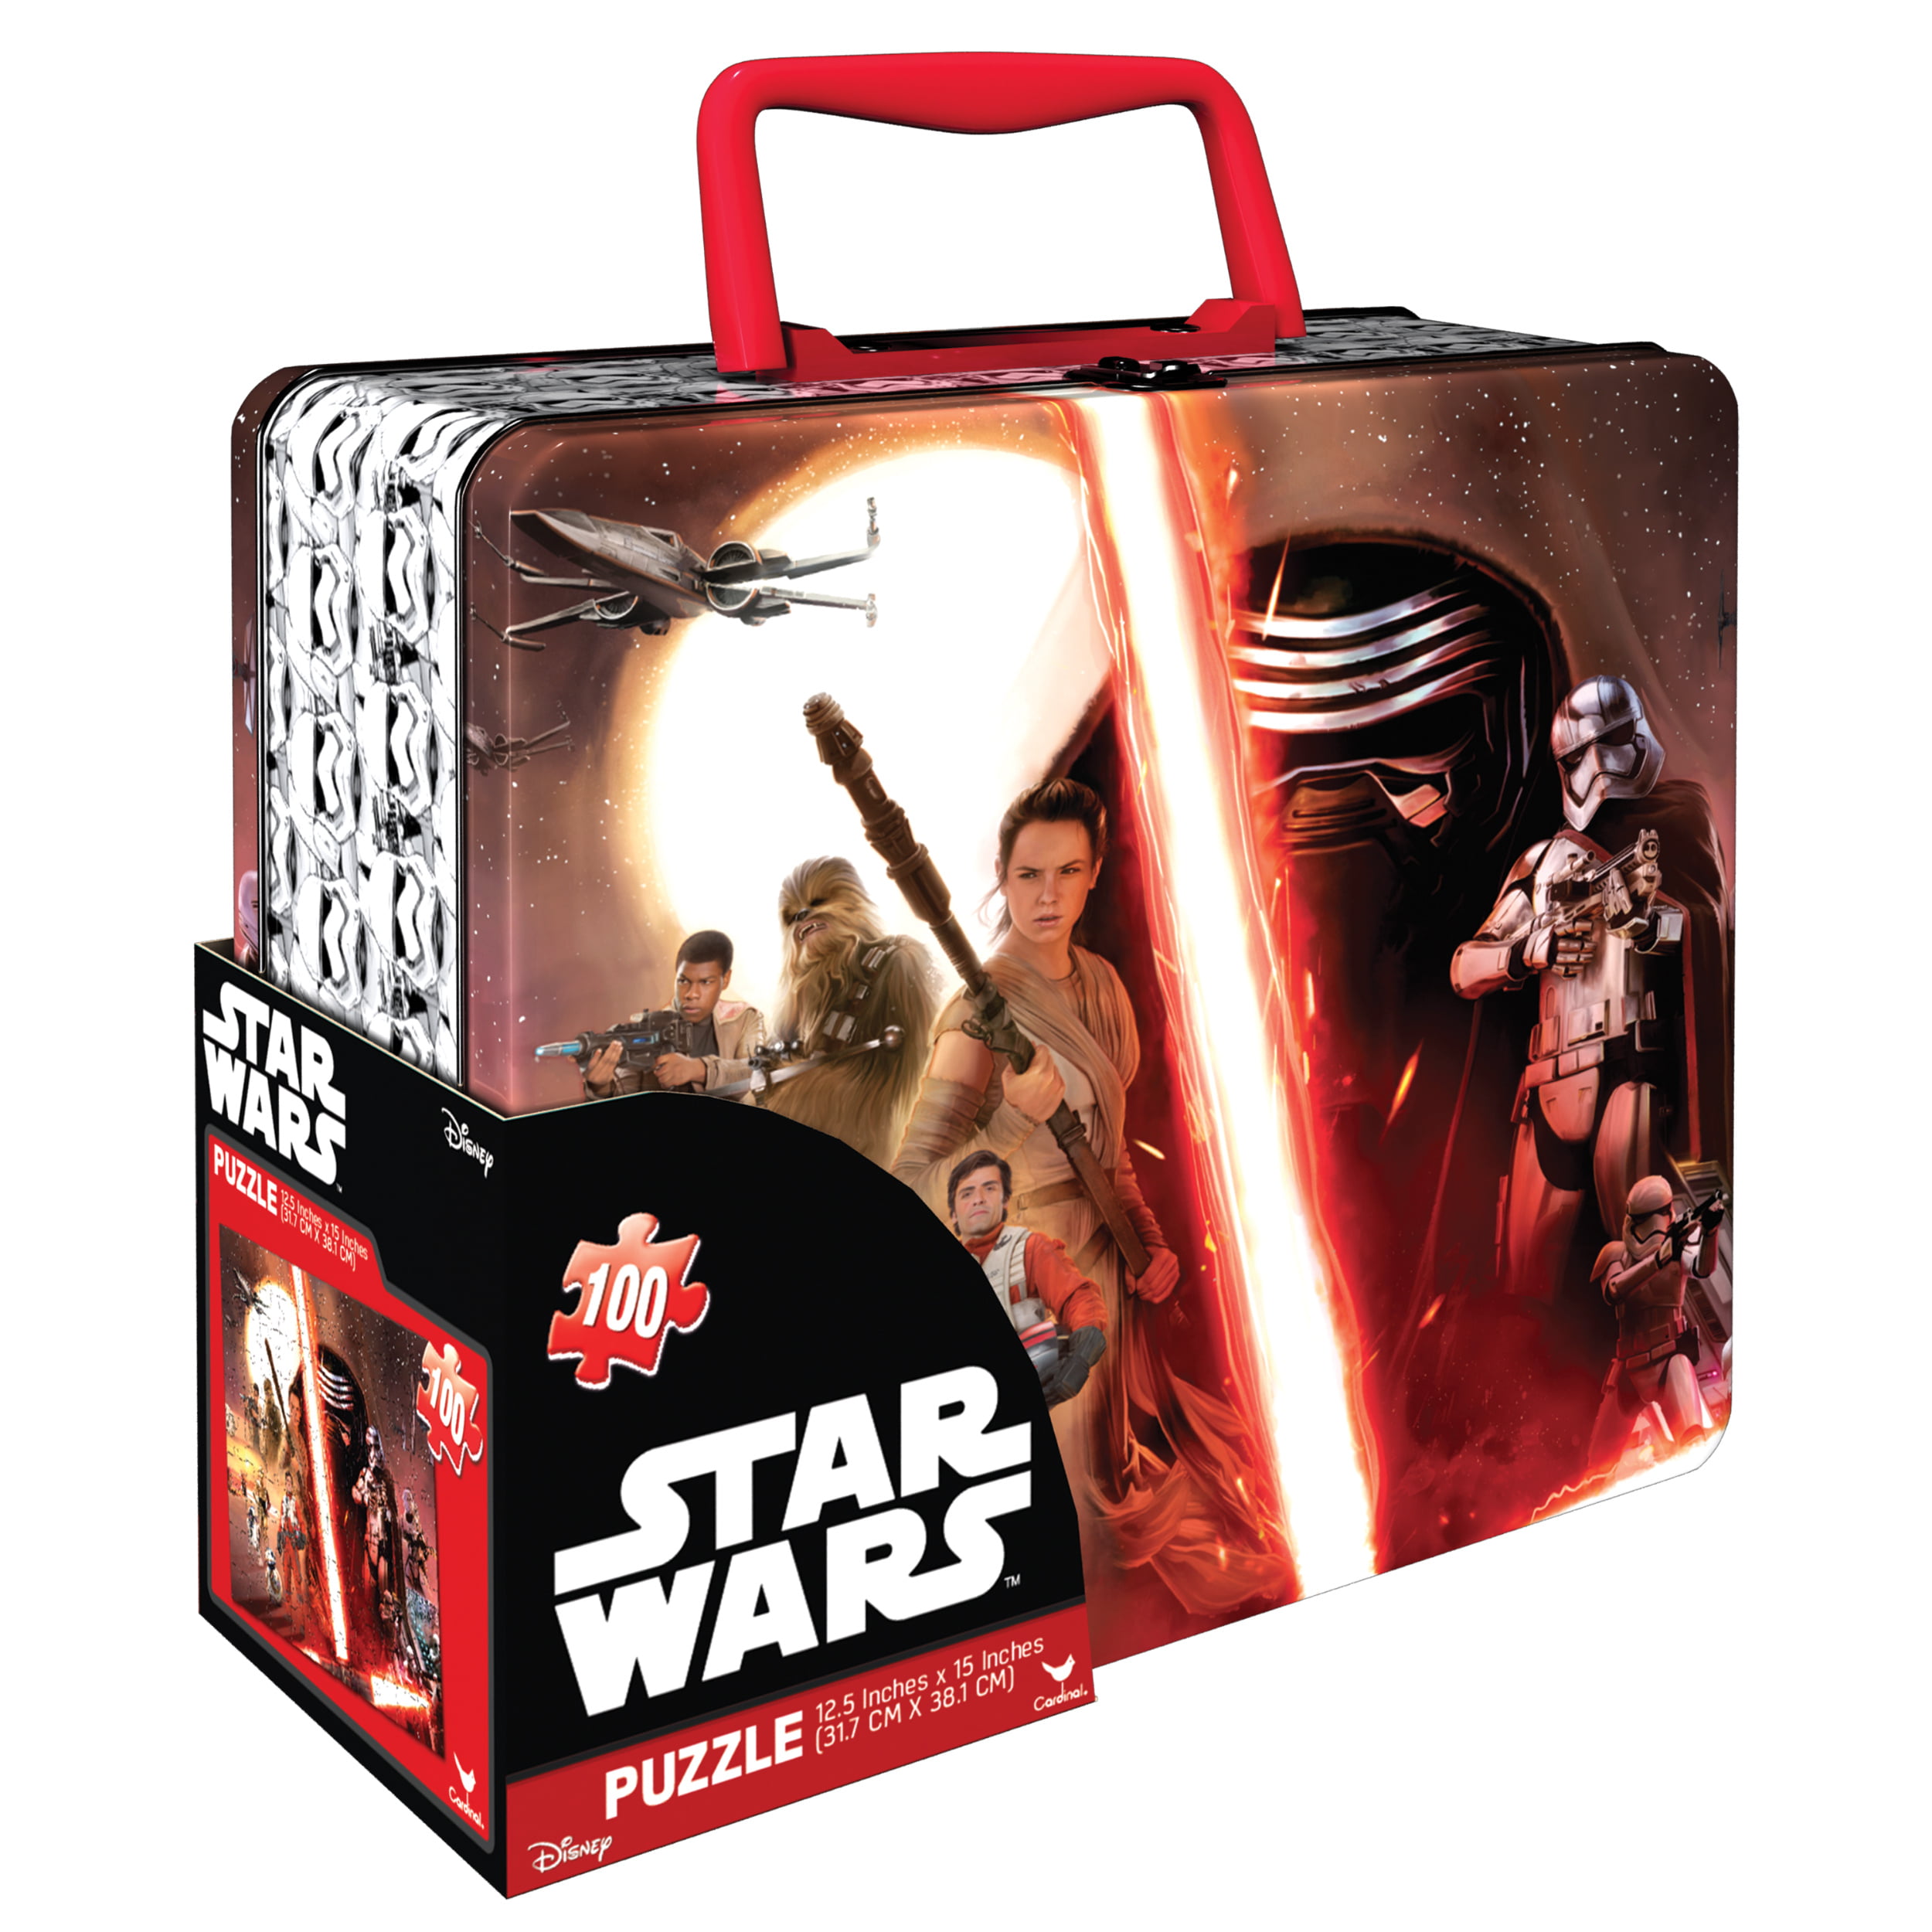 Disney Star Wars "The Force Awakens"  7 Wood Puzzle Set with Wooden Storage Box 